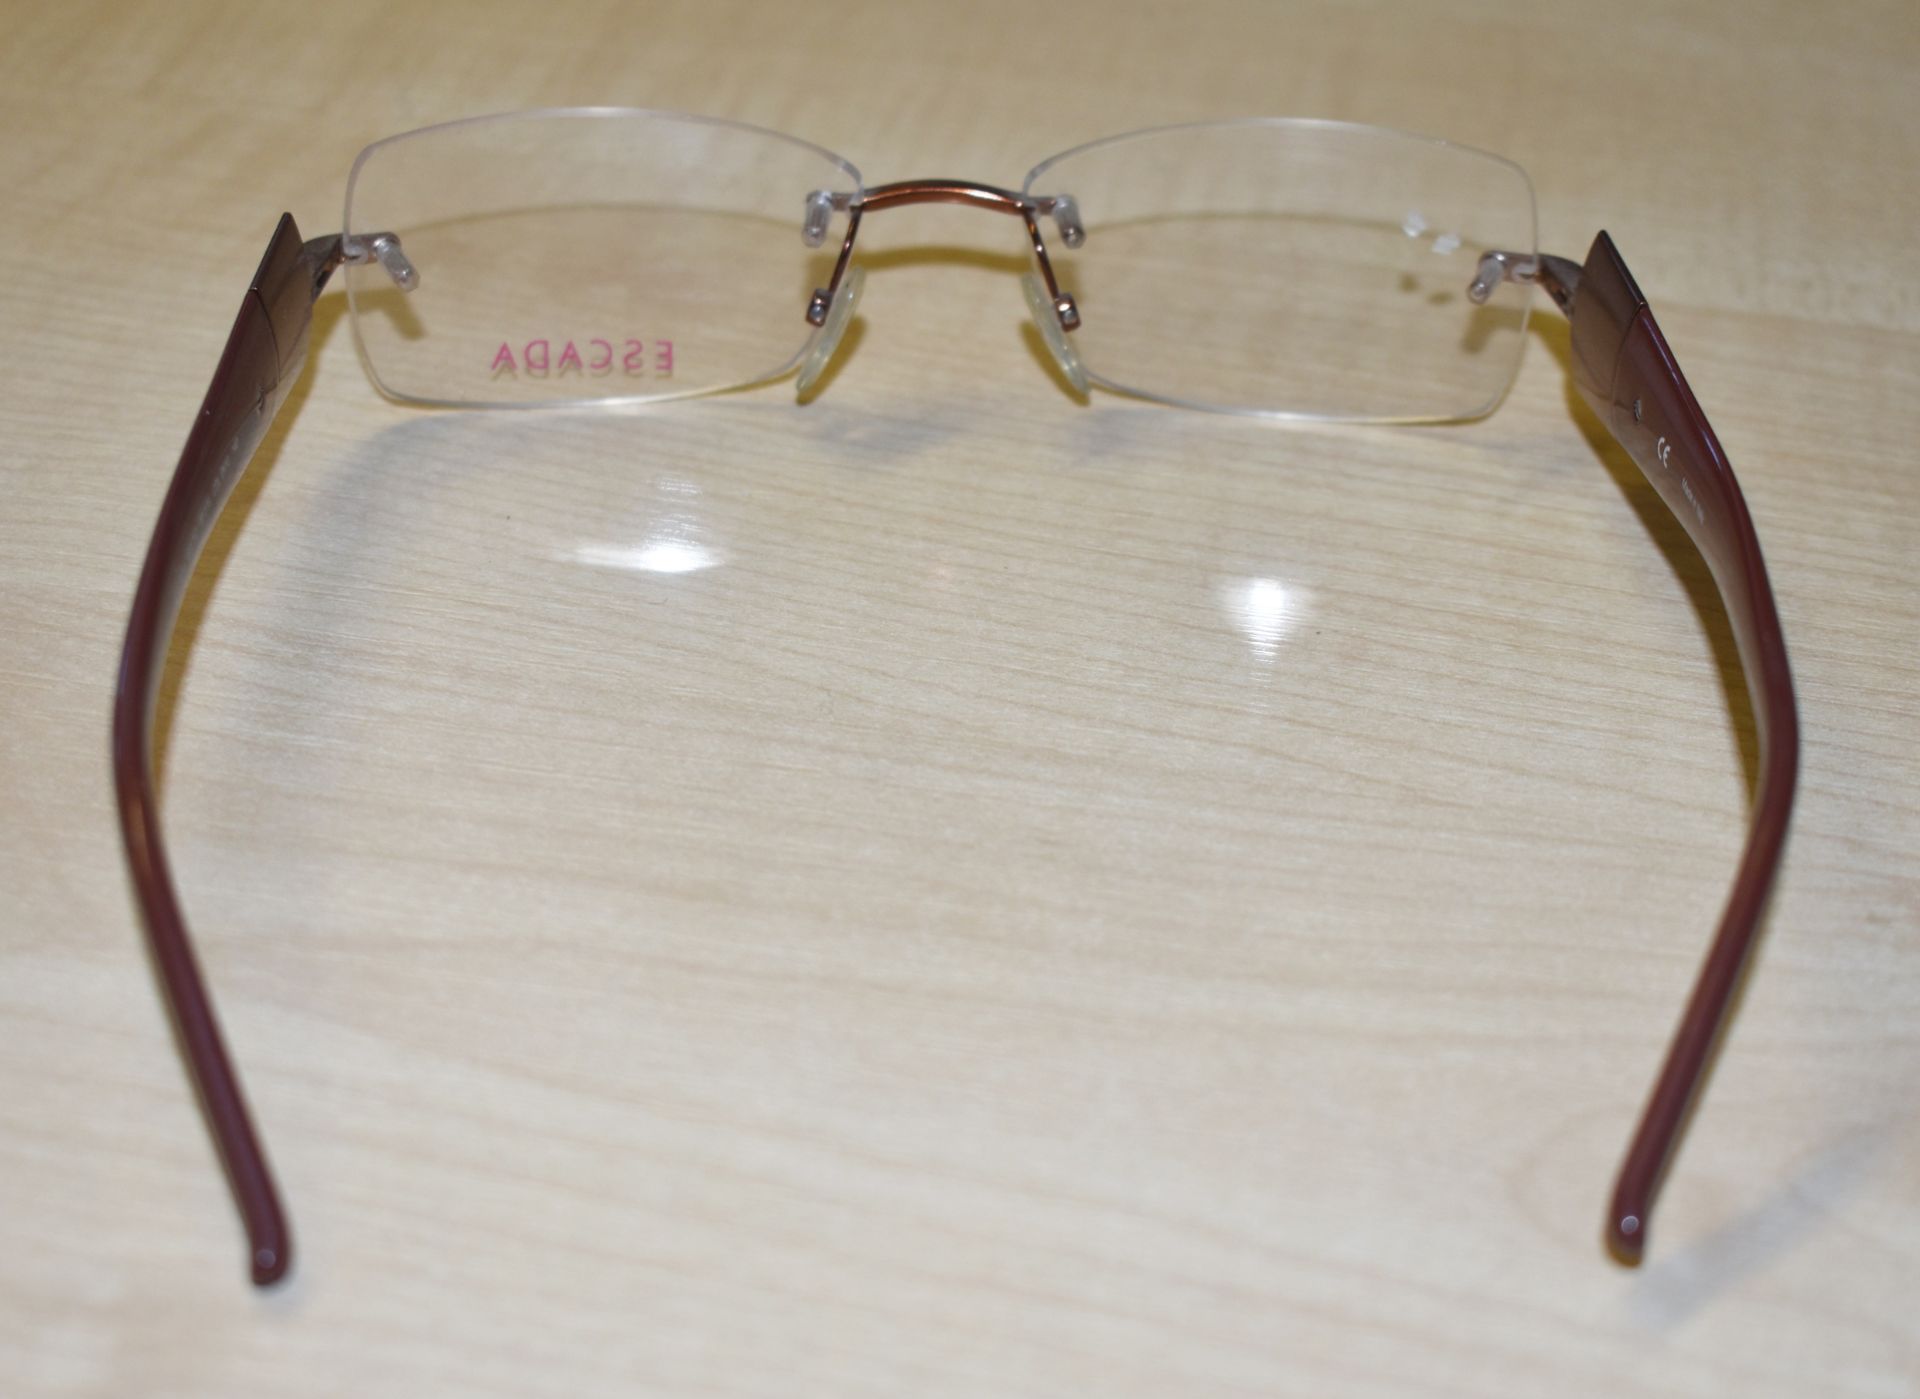 1 x Genuine ESCADA Spectacle Eye Glasses Frame - Ex Display Stock  - Ref: GTI199 - CL645 - Location: - Image 4 of 8